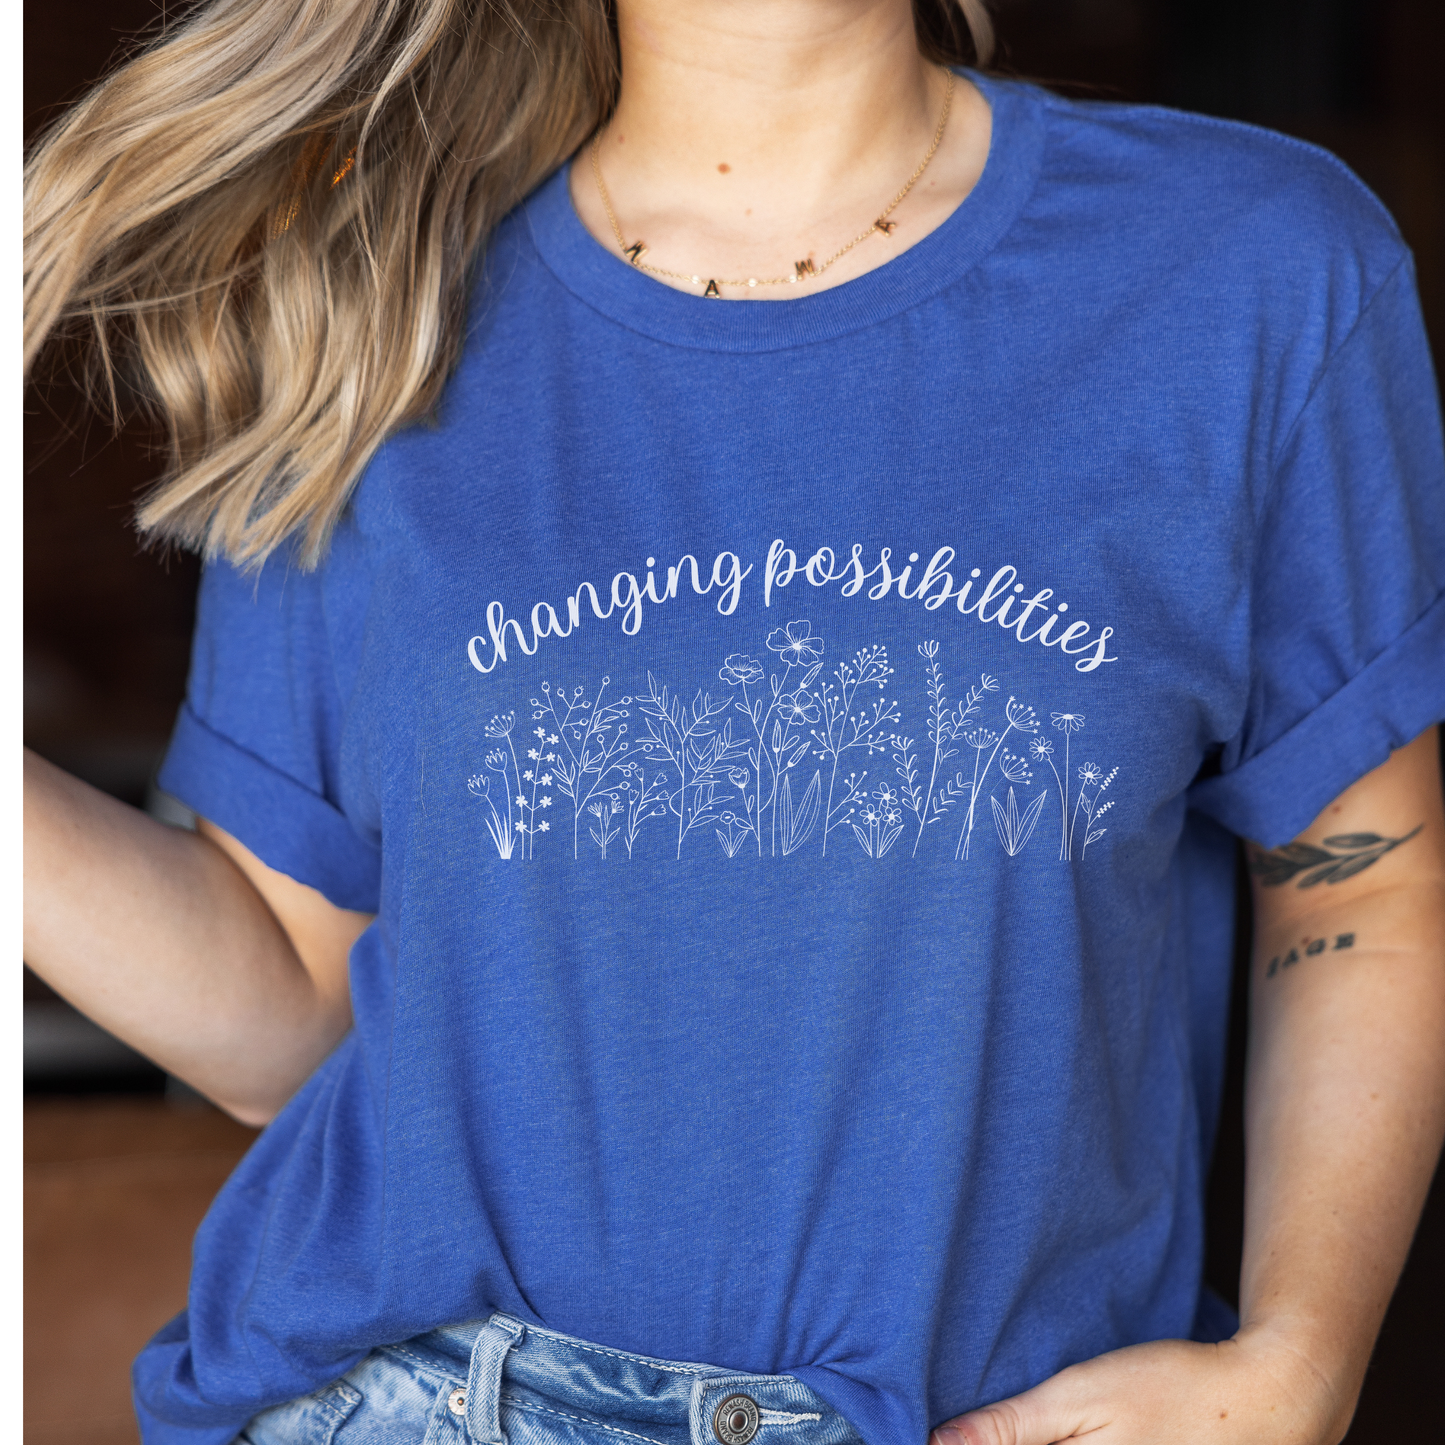 The front of this tshirt has the empowering words Changing Possibilities over a beautiful wildflower design. This tee celebrates advocates who are changing the world. Join the movement to change possibilities and create a culture of empowerment.